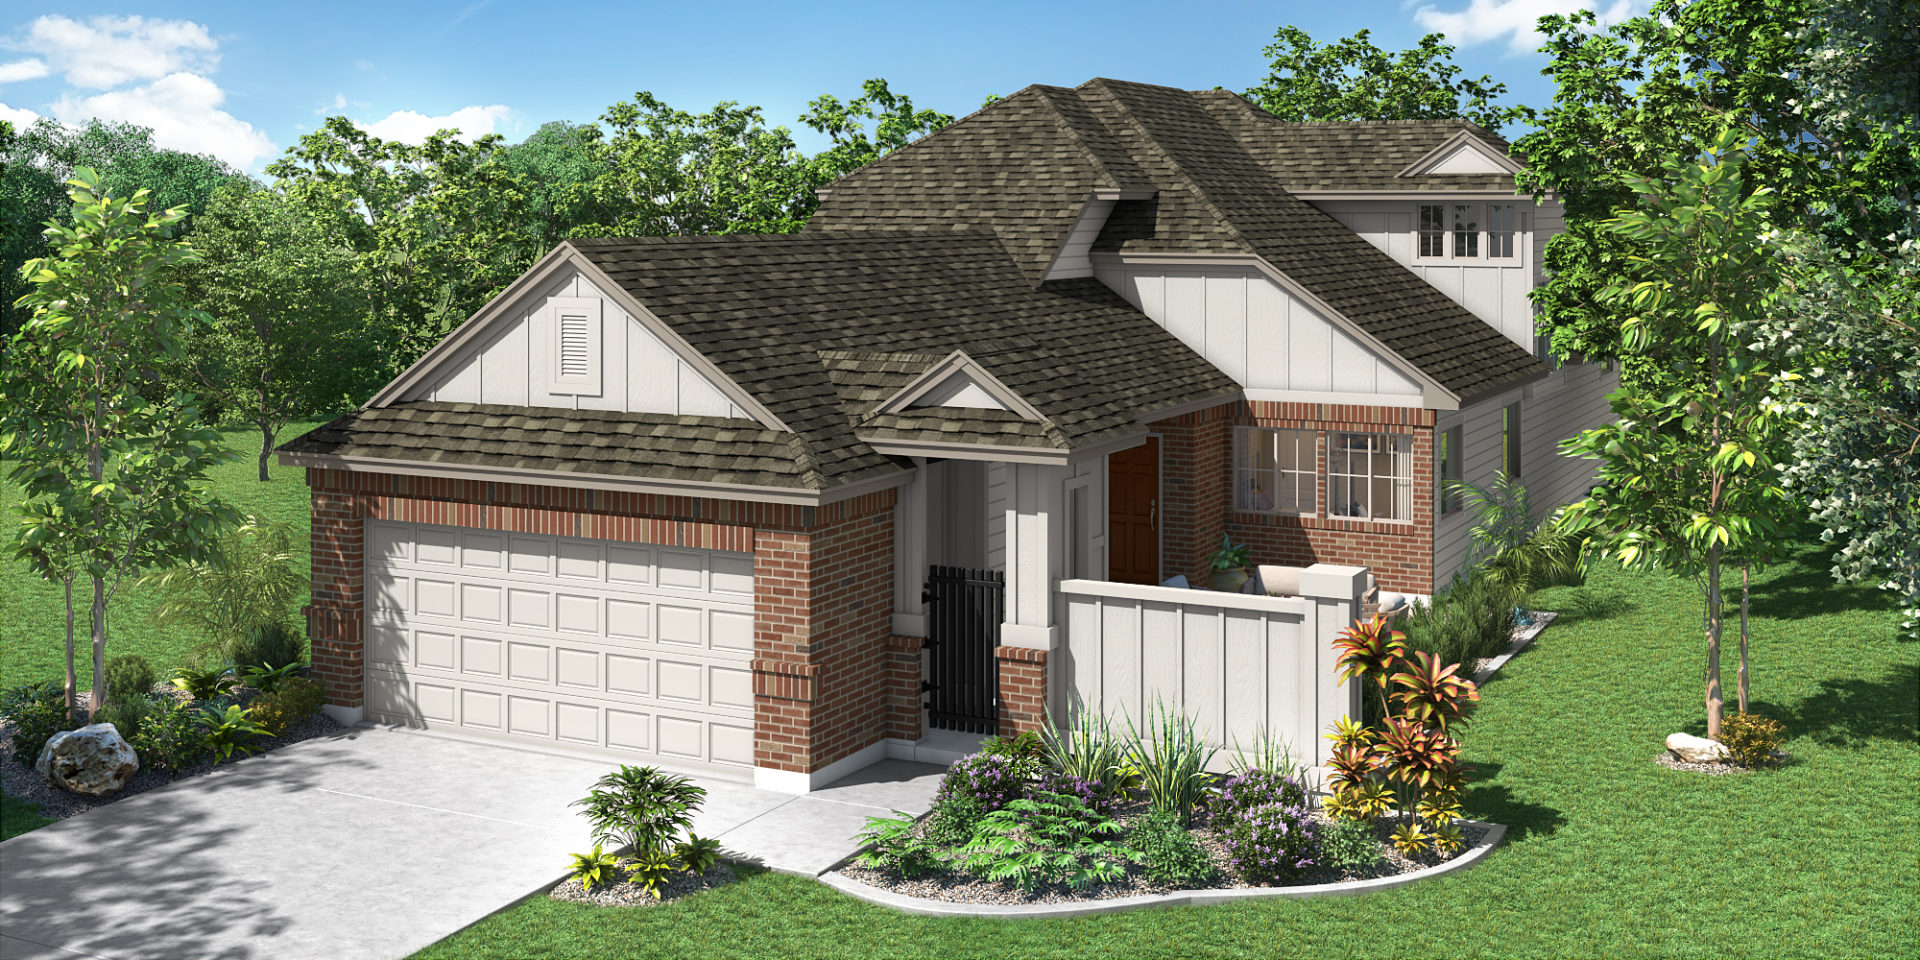  Enclave at Meadow Run - New Model Now Open! New Homes in Melissa